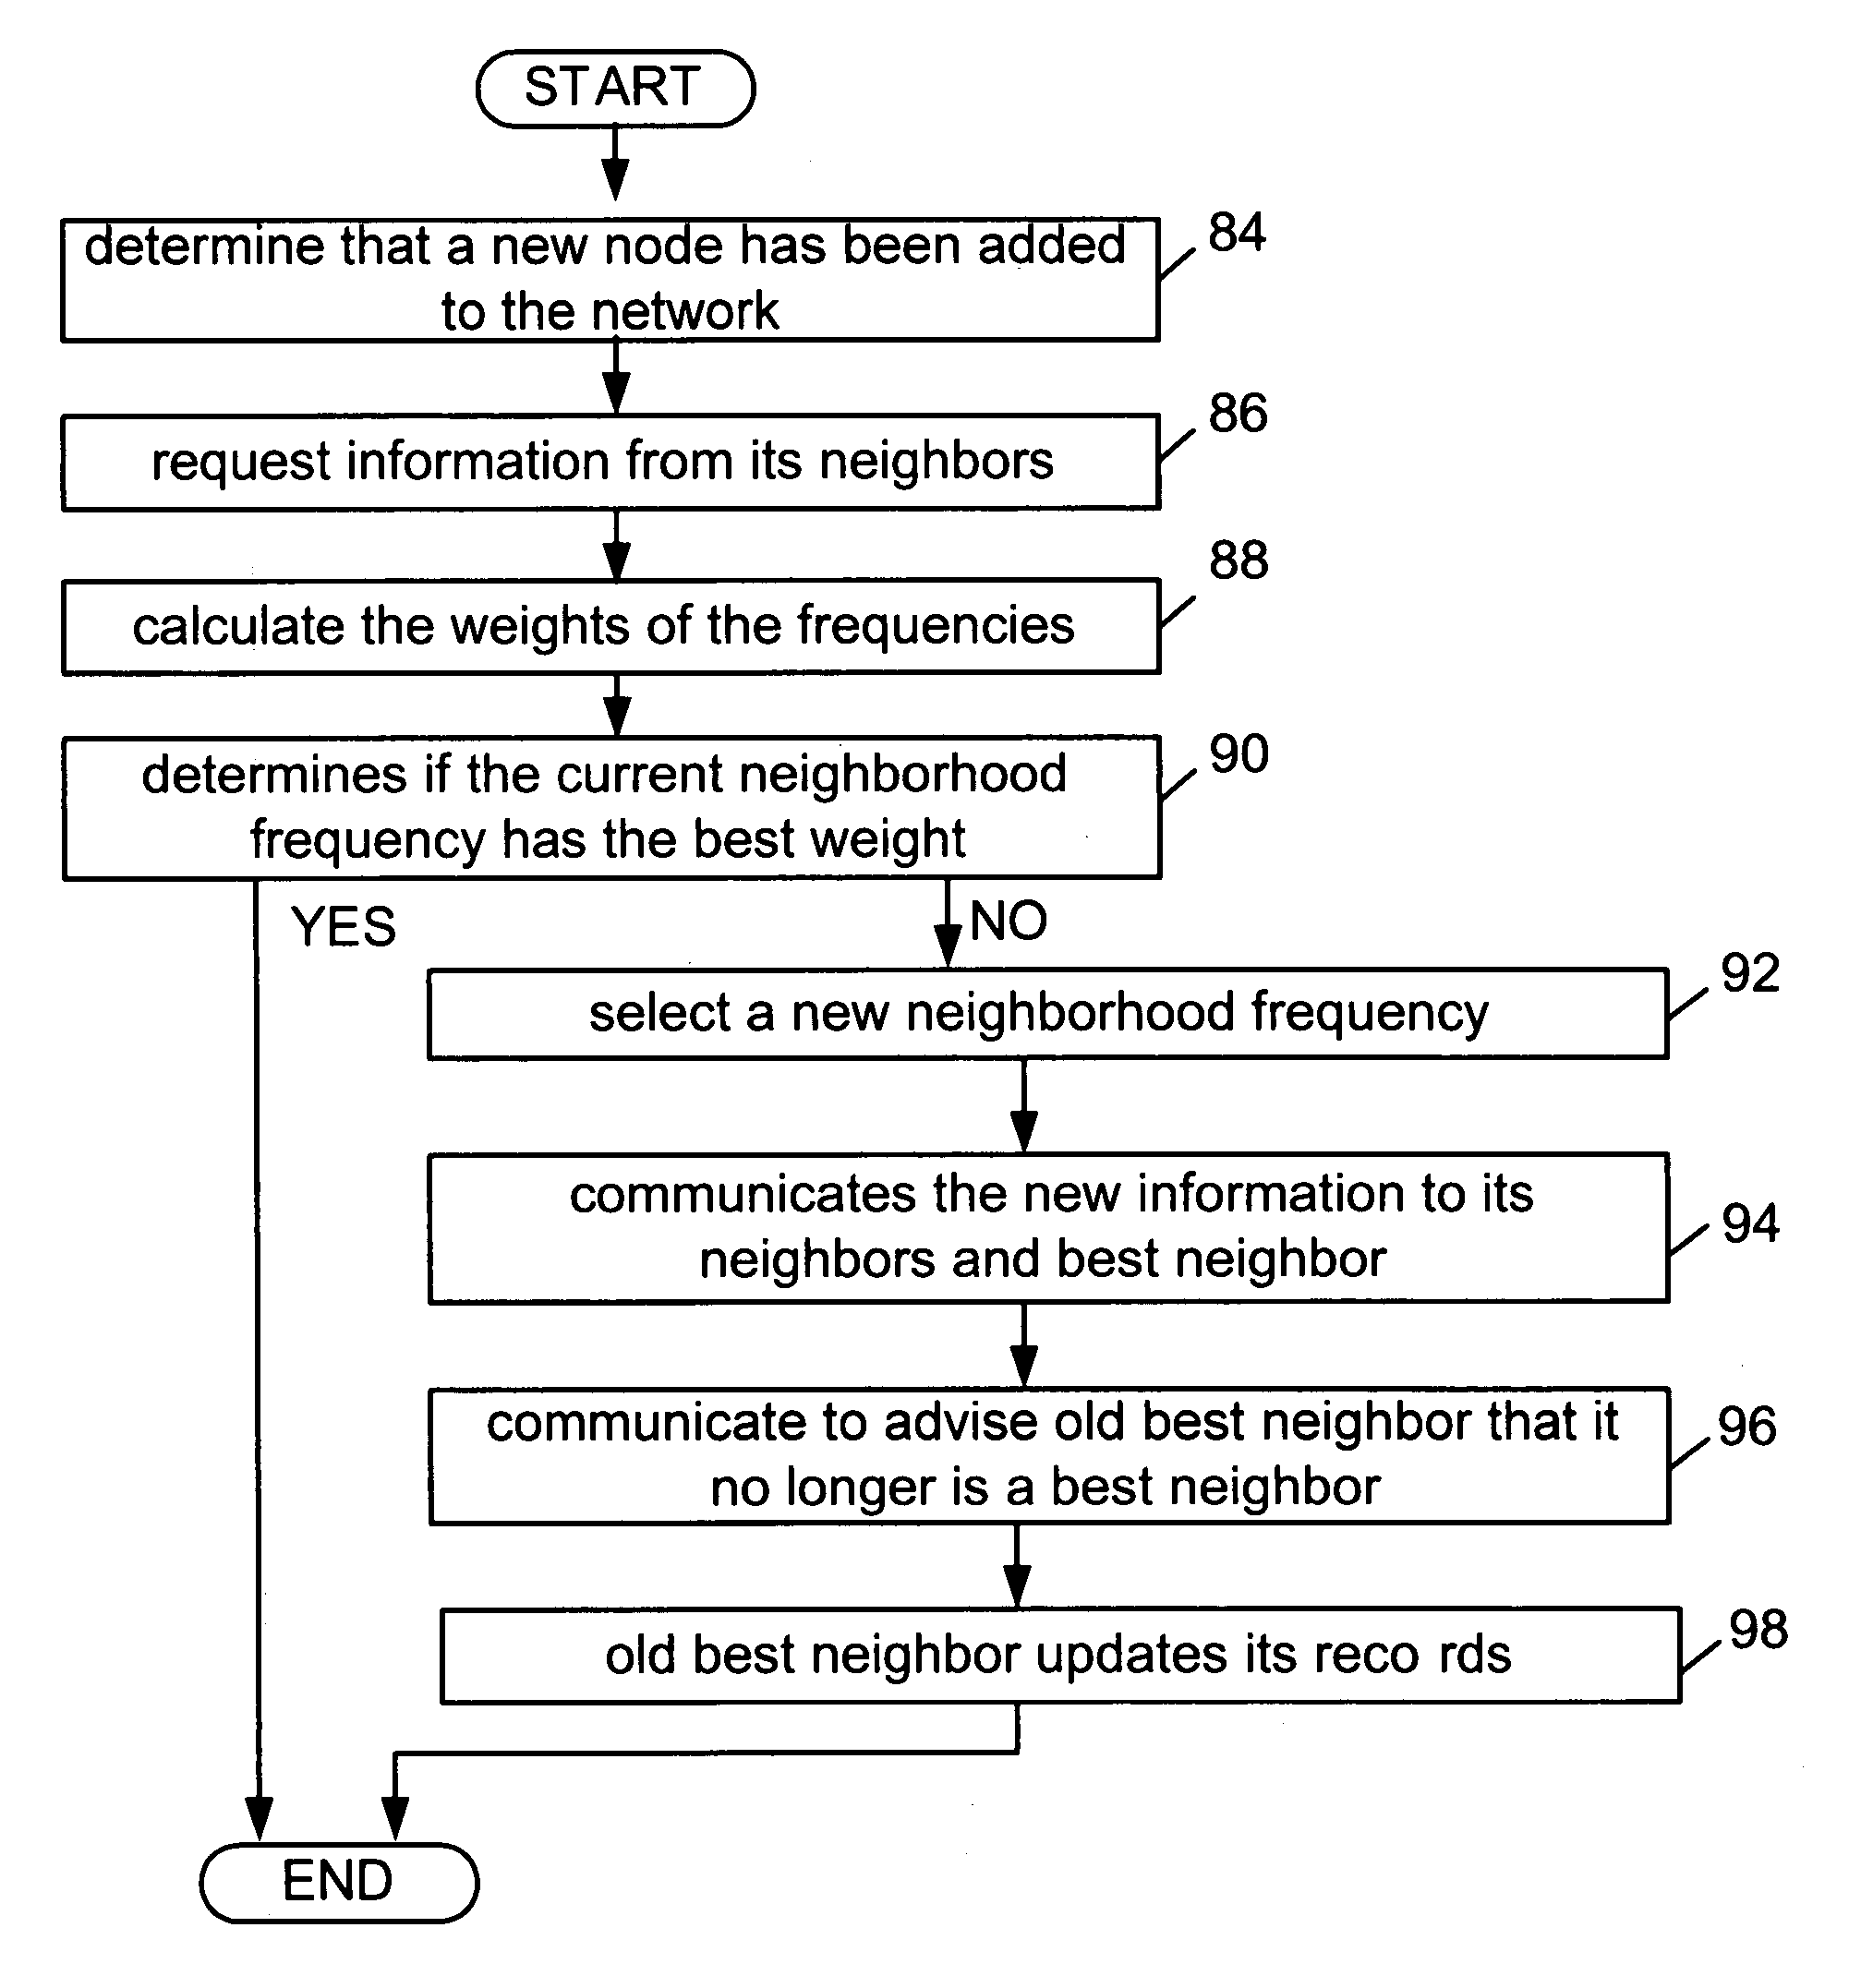 Self-selection of radio frequency channels to reduce co-channel and adjacent channel interference in a wireless distributed network